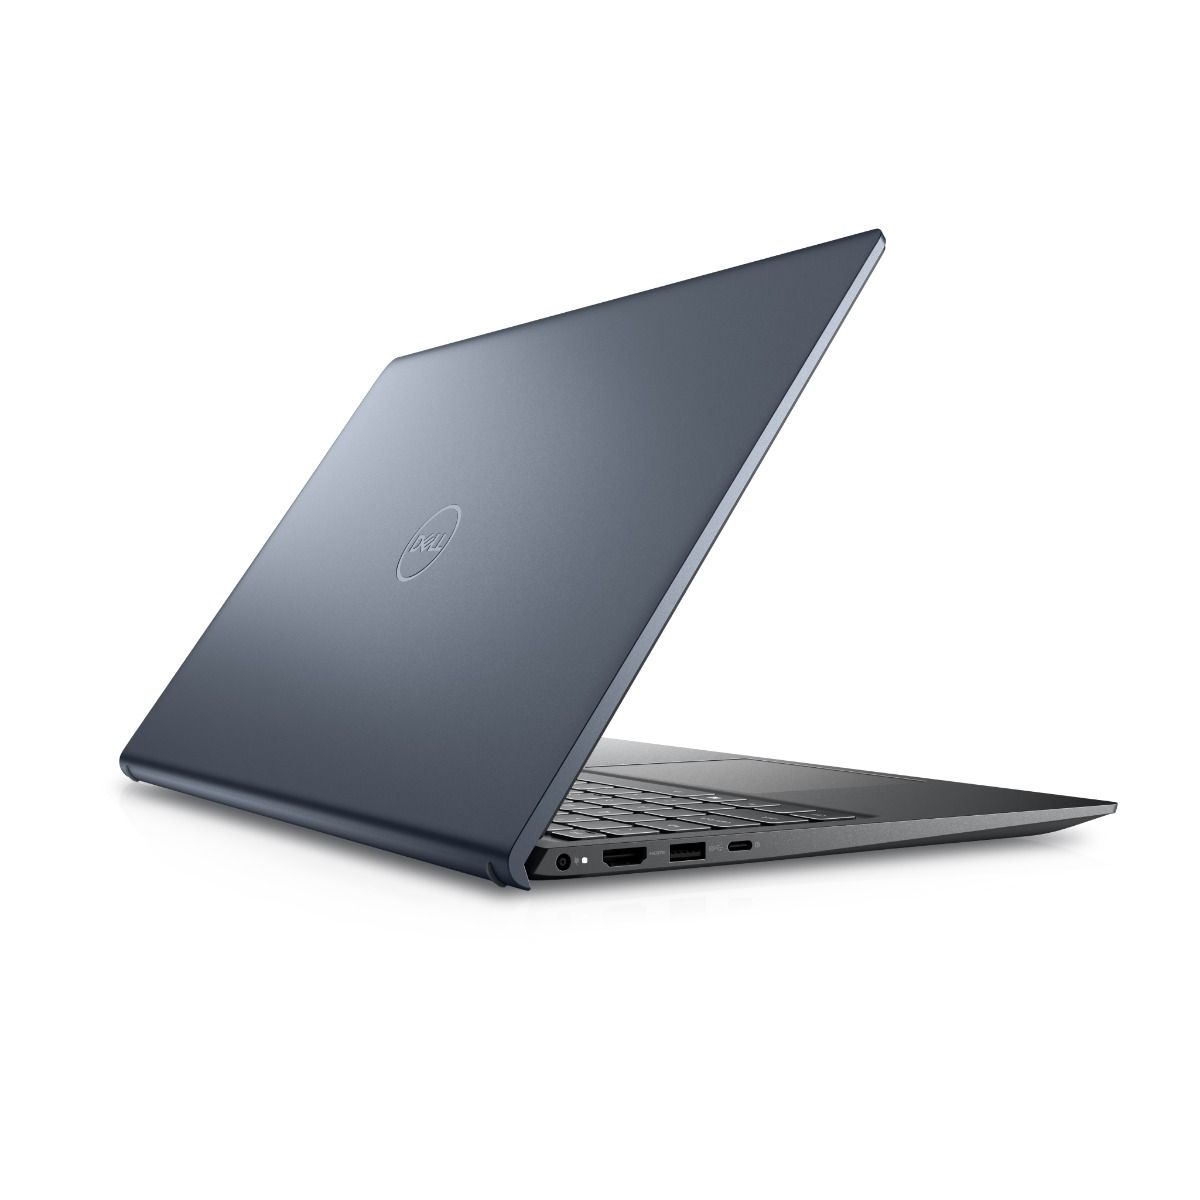 Dell Inspiron 5415 Price in Nepal | Affordable laptop with Octa-core